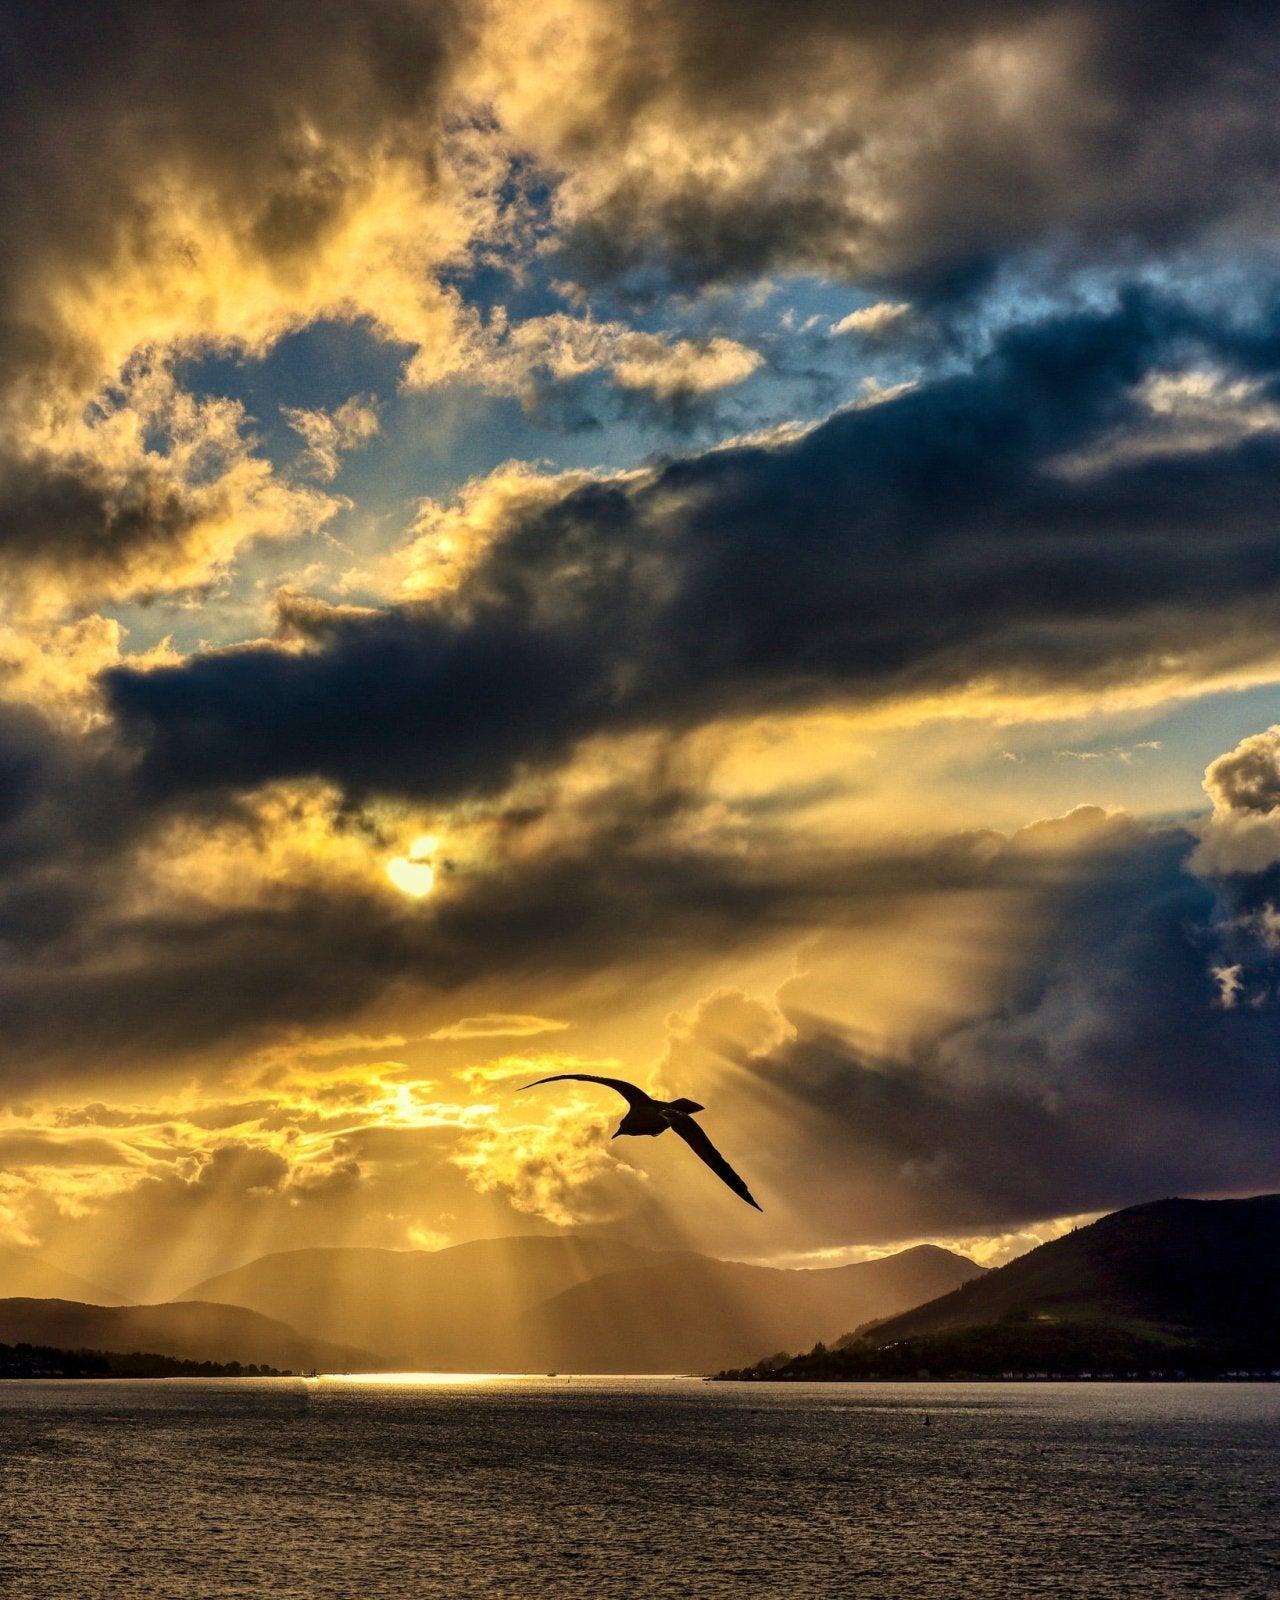 Seagull Clyde Sunset Scottish Landscape Photography-Scottish Landscape Photography-River Clyde Art Gallery-Paintings, Prints, Homeware, Art Gifts From Scotland By Scottish Artist Kevin Hunter